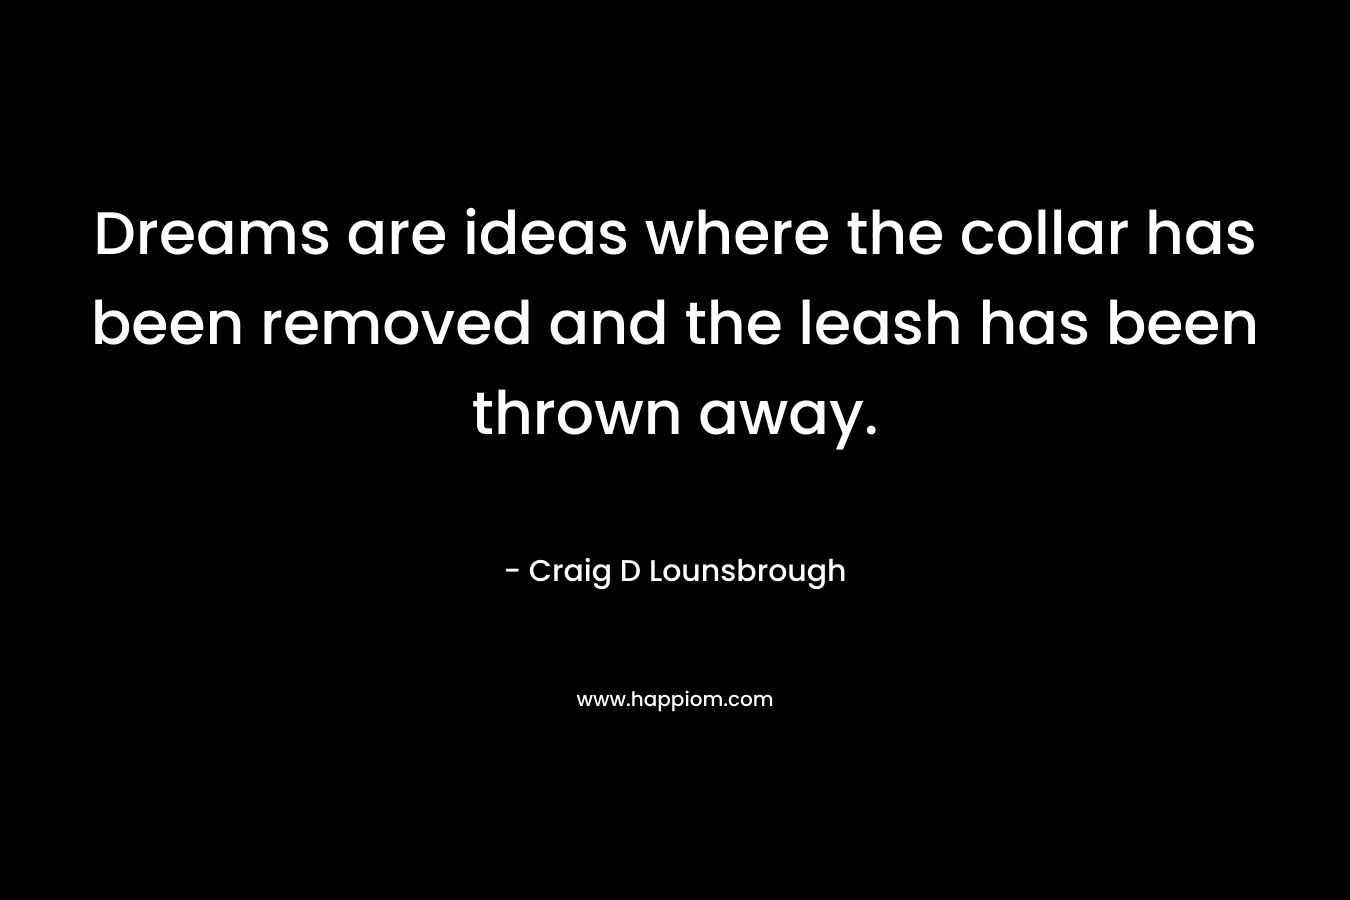 Dreams are ideas where the collar has been removed and the leash has been thrown away. – Craig D Lounsbrough